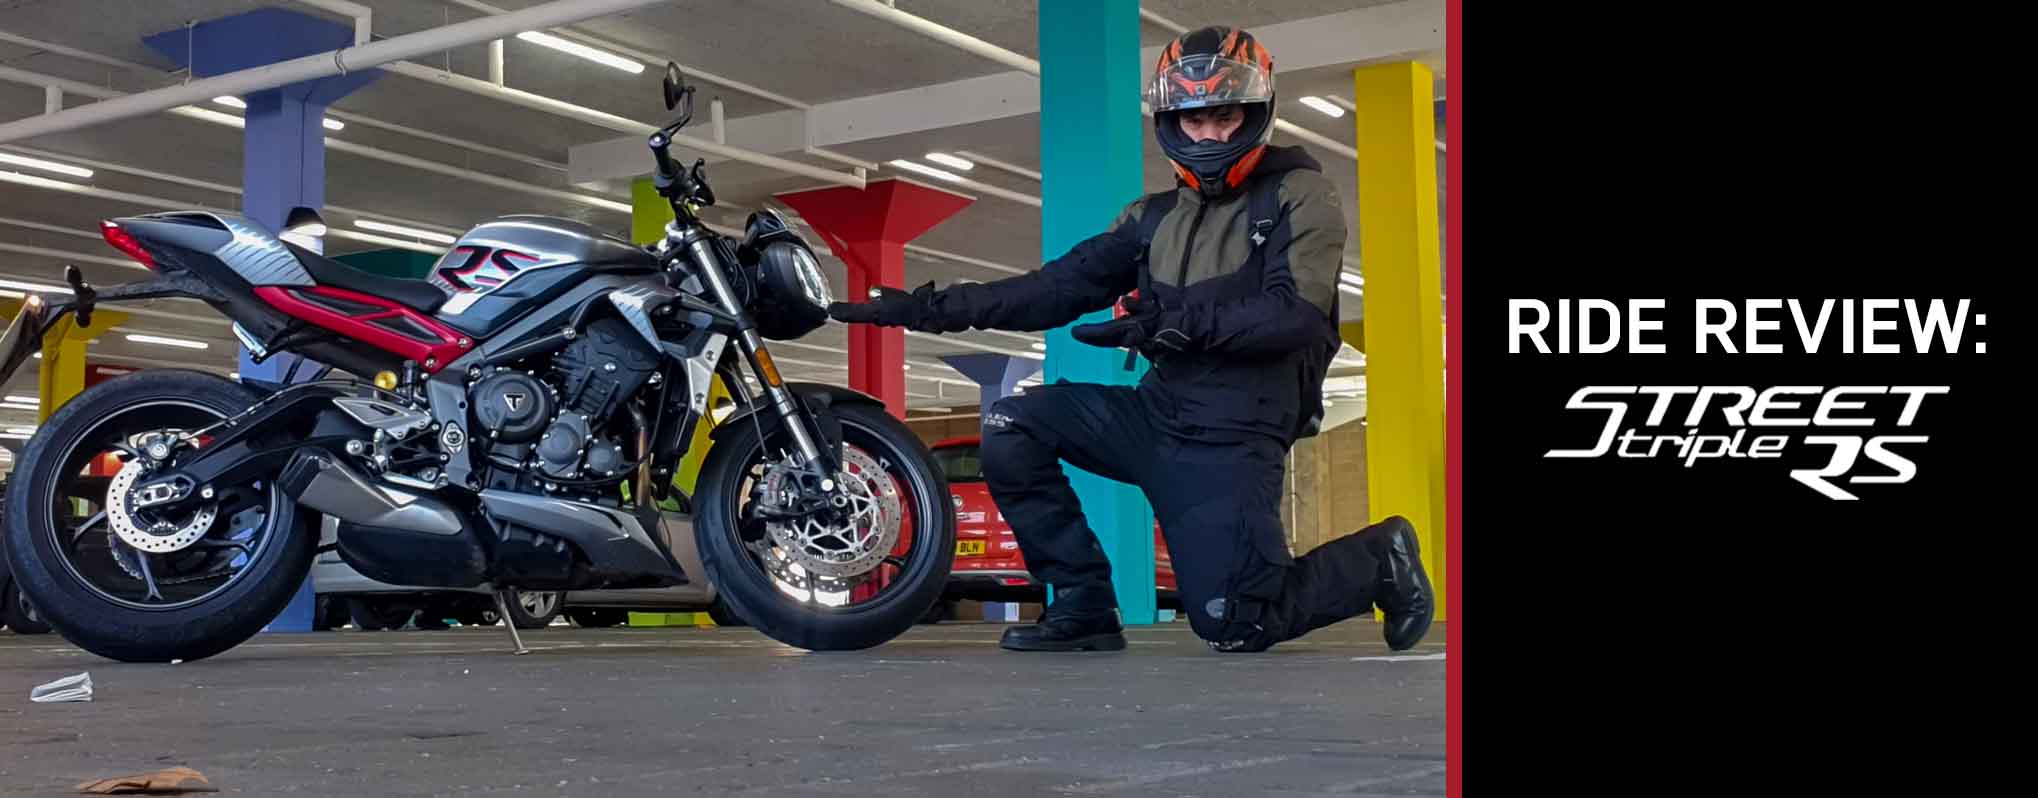 The Street Triple RS - 2022 Ride Review